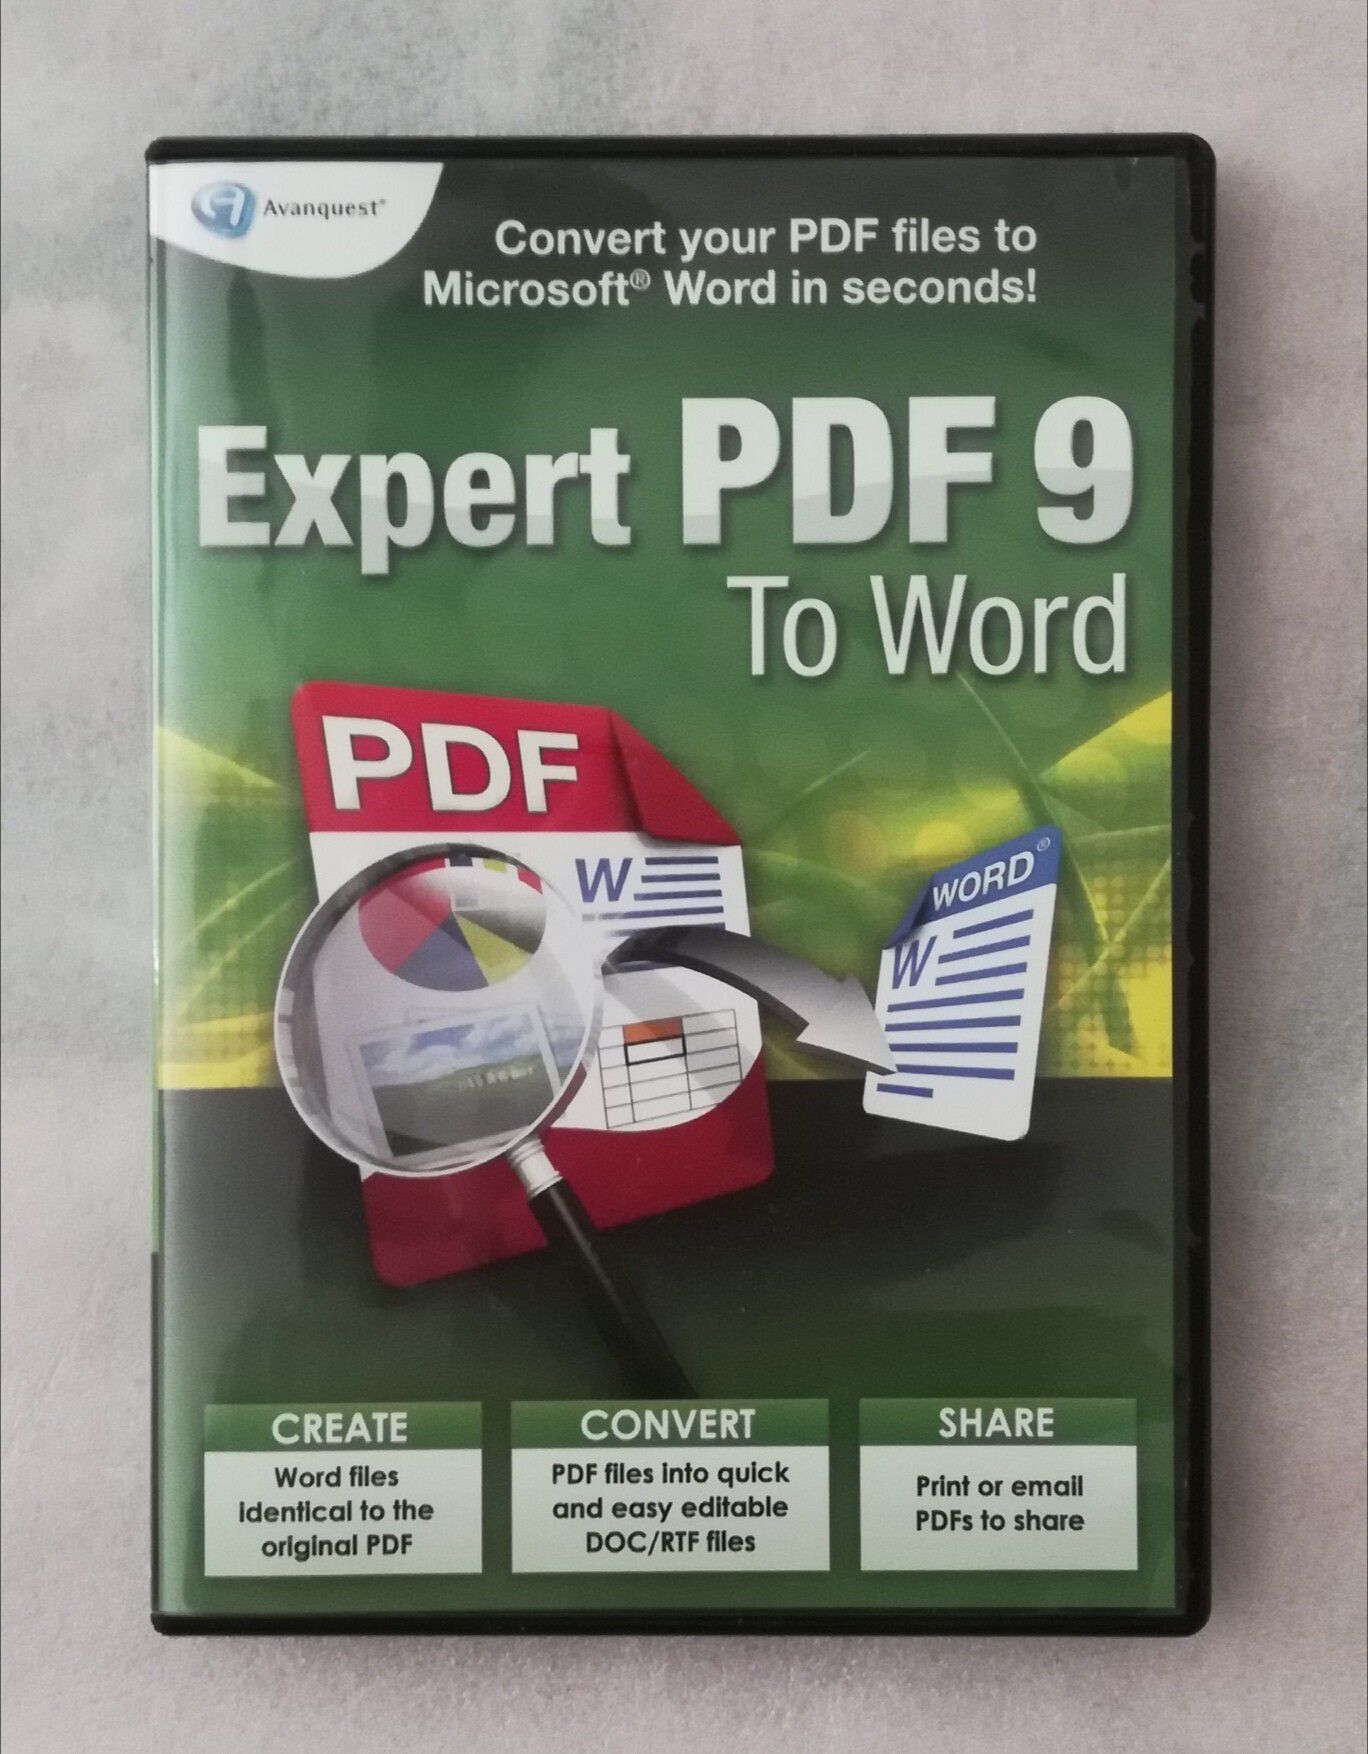 EXPERT PDF 9 TO WORD